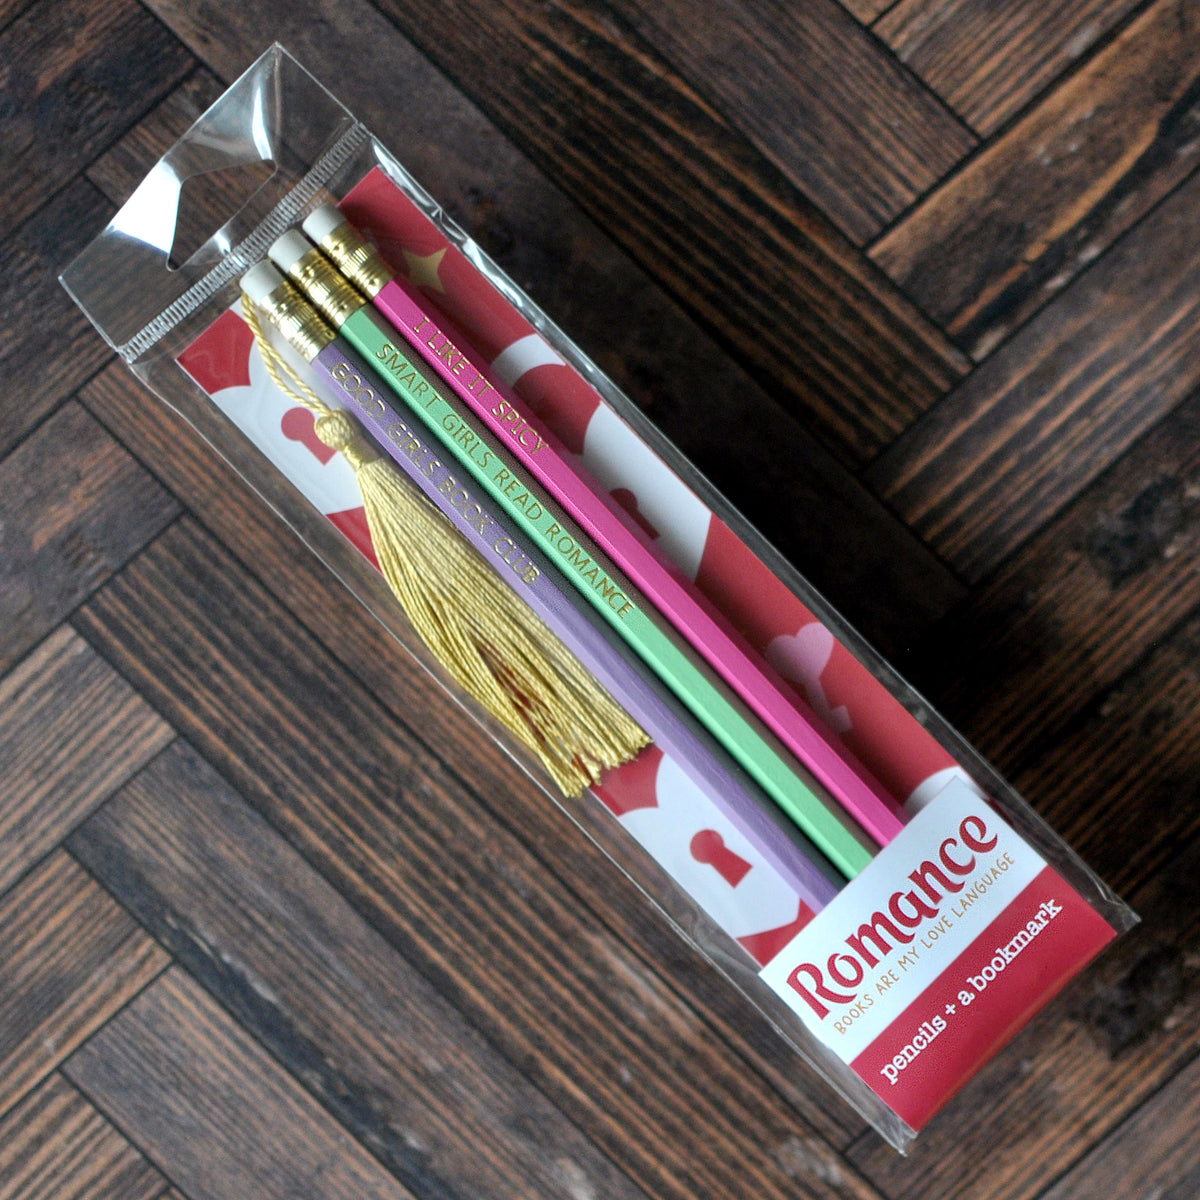 Three Pencils and Bookmark Set for Romance Readers - Smart Girls Read Romance, I Like It Spicy, Good Girls Book Club foil stamped pencils